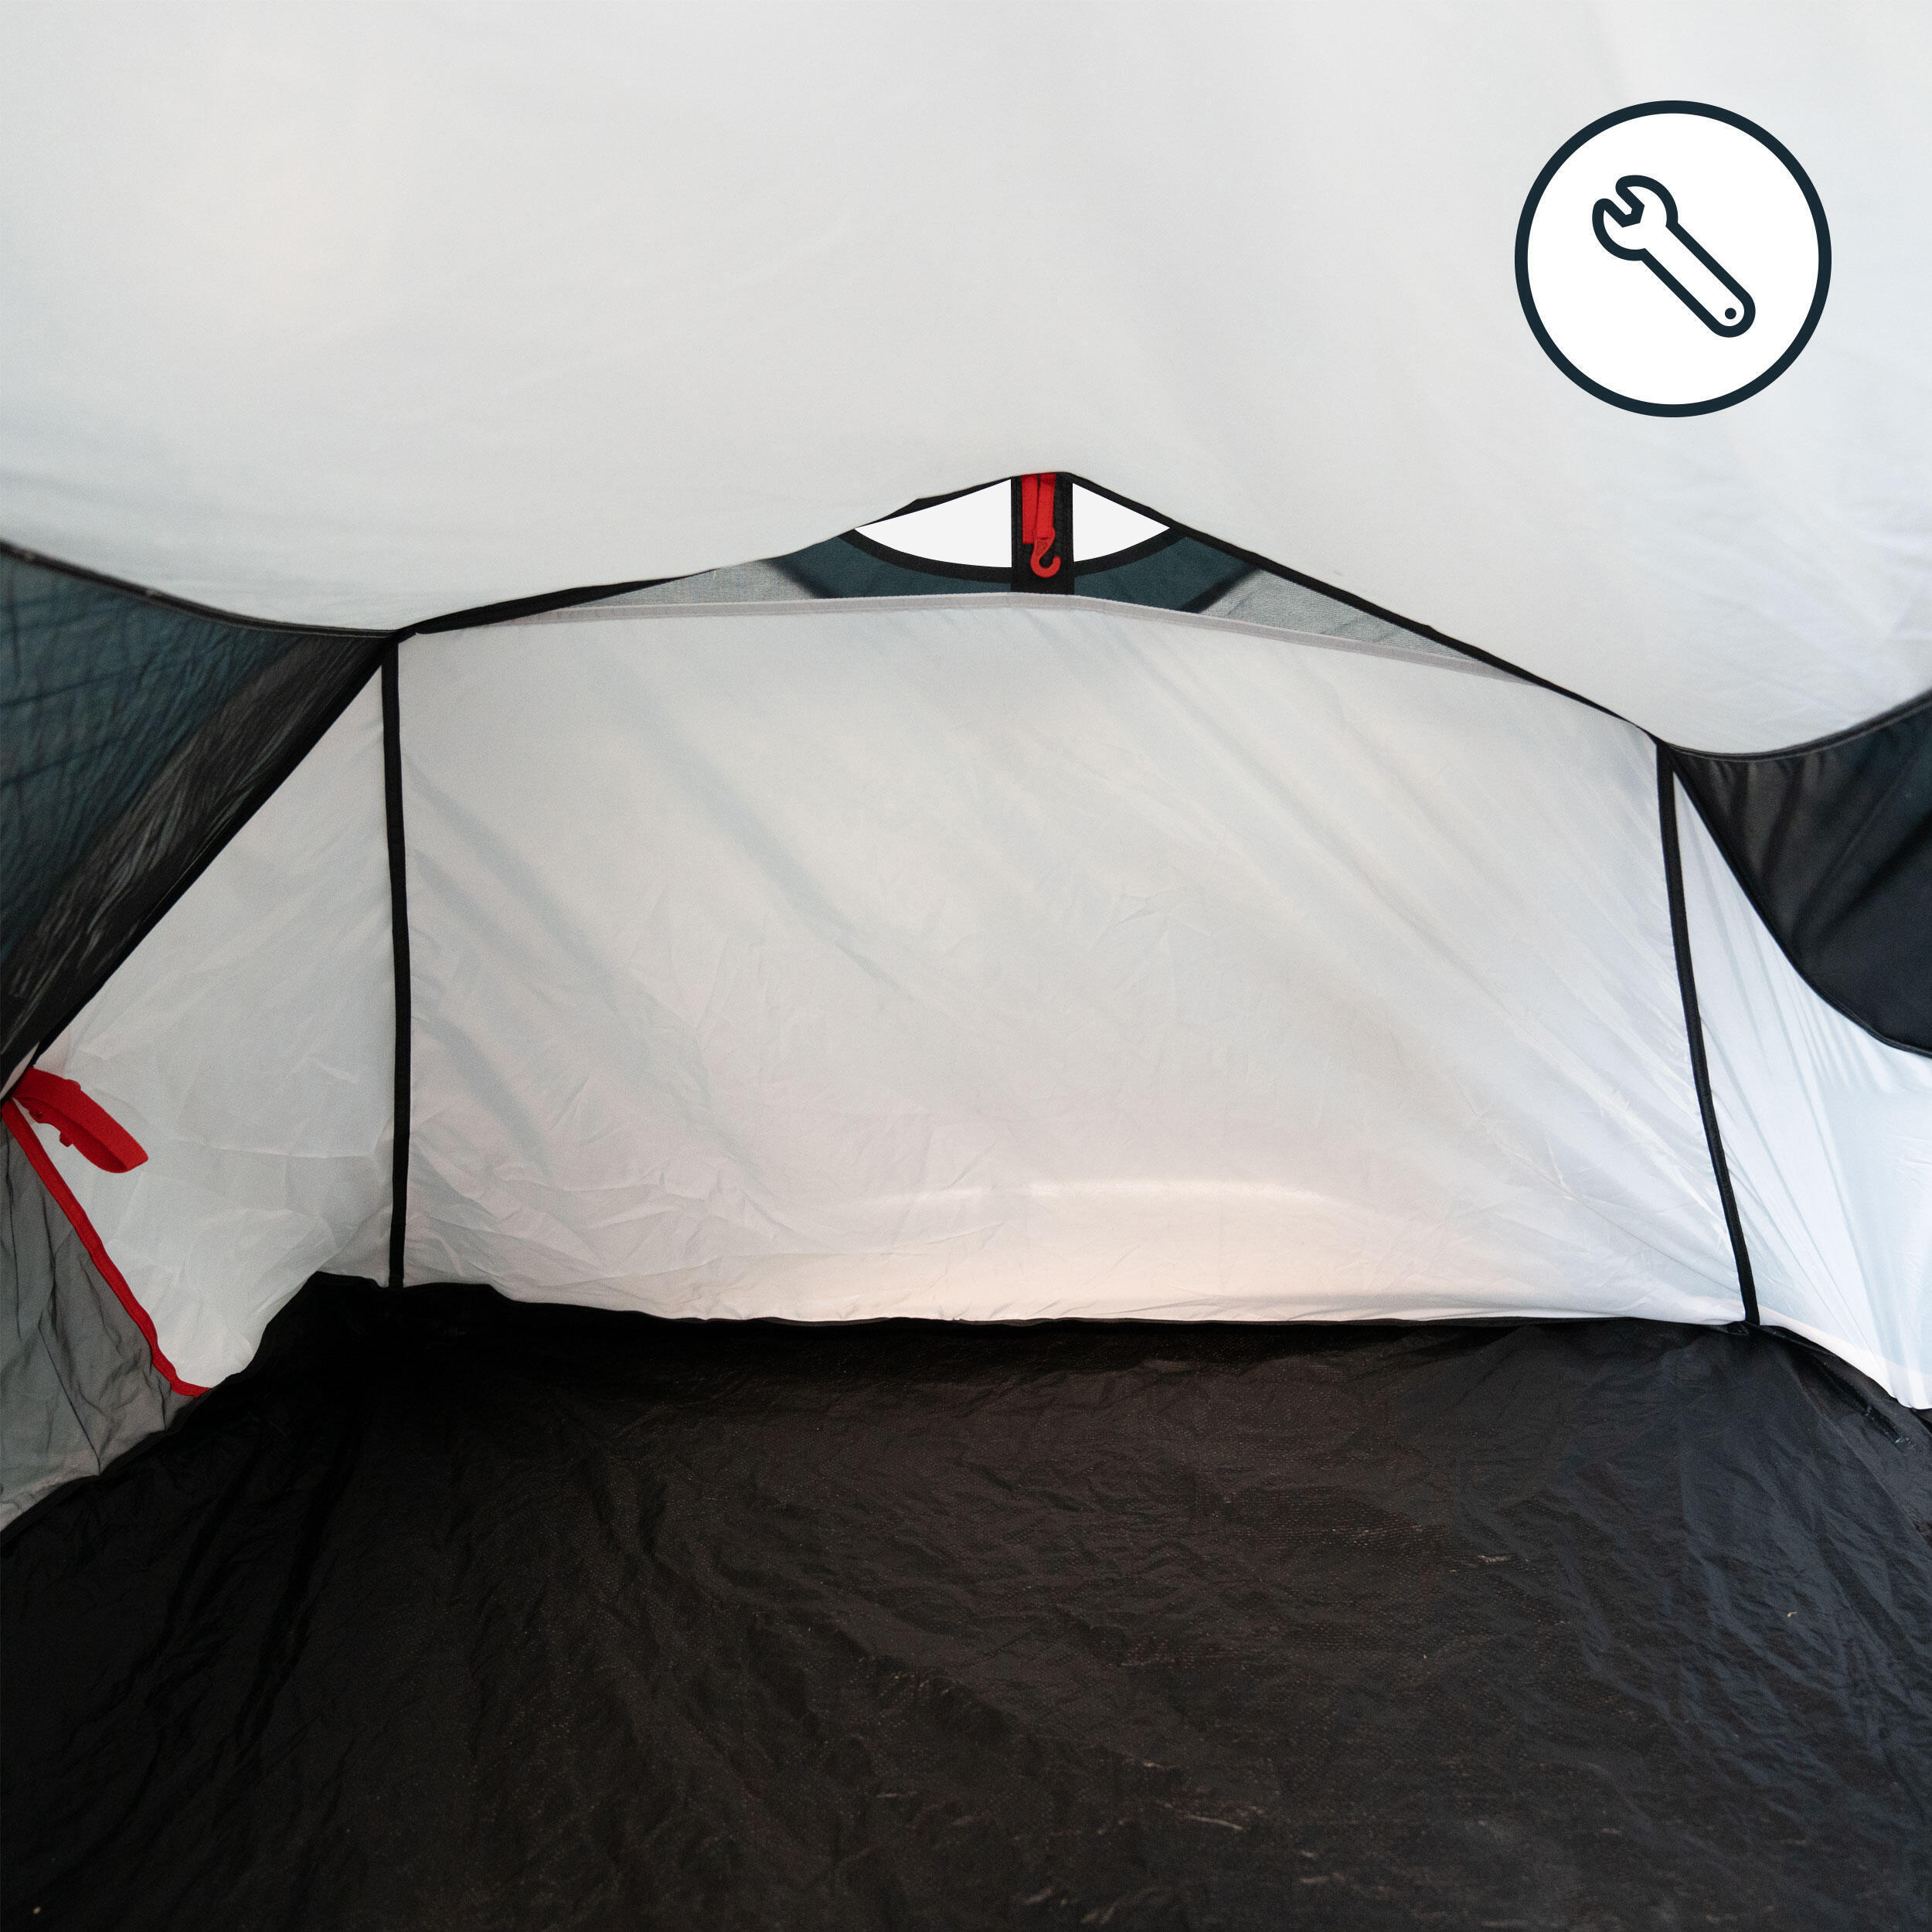 QUECHUA BEDROOM - SPARE PART FOR THE 2 SECONDS 3 PERSON TENT